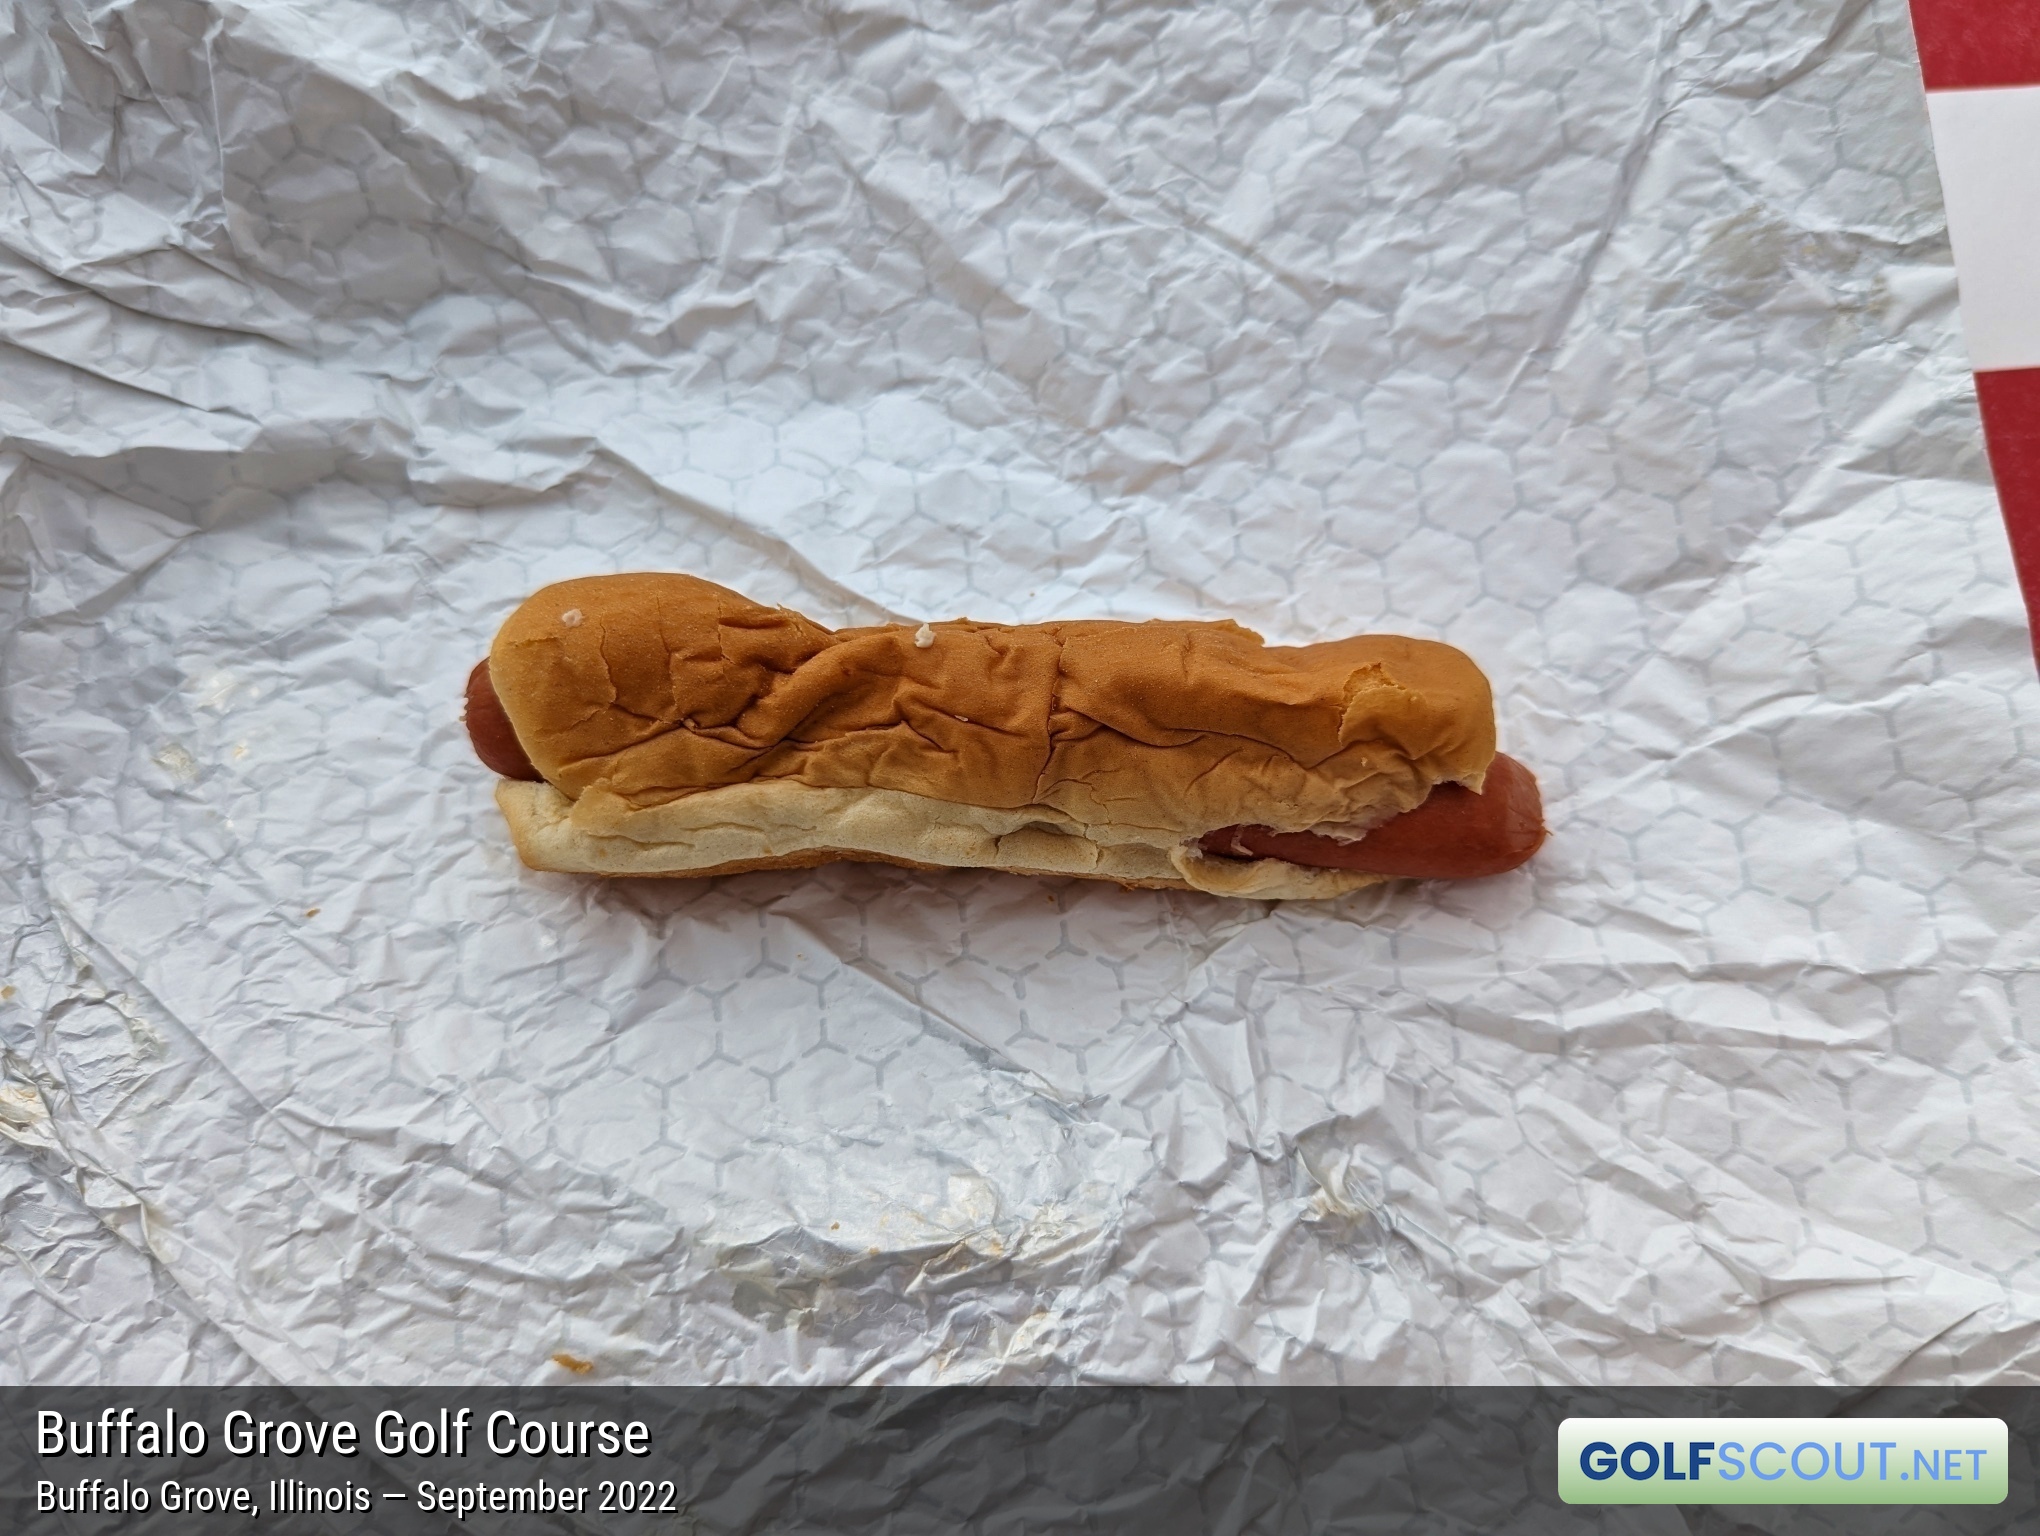 Photo of the food and dining at Buffalo Grove Golf Course in Buffalo Grove, Illinois. Photo of the hot dog at Buffalo Grove Golf Course in Buffalo Grove, Illinois.